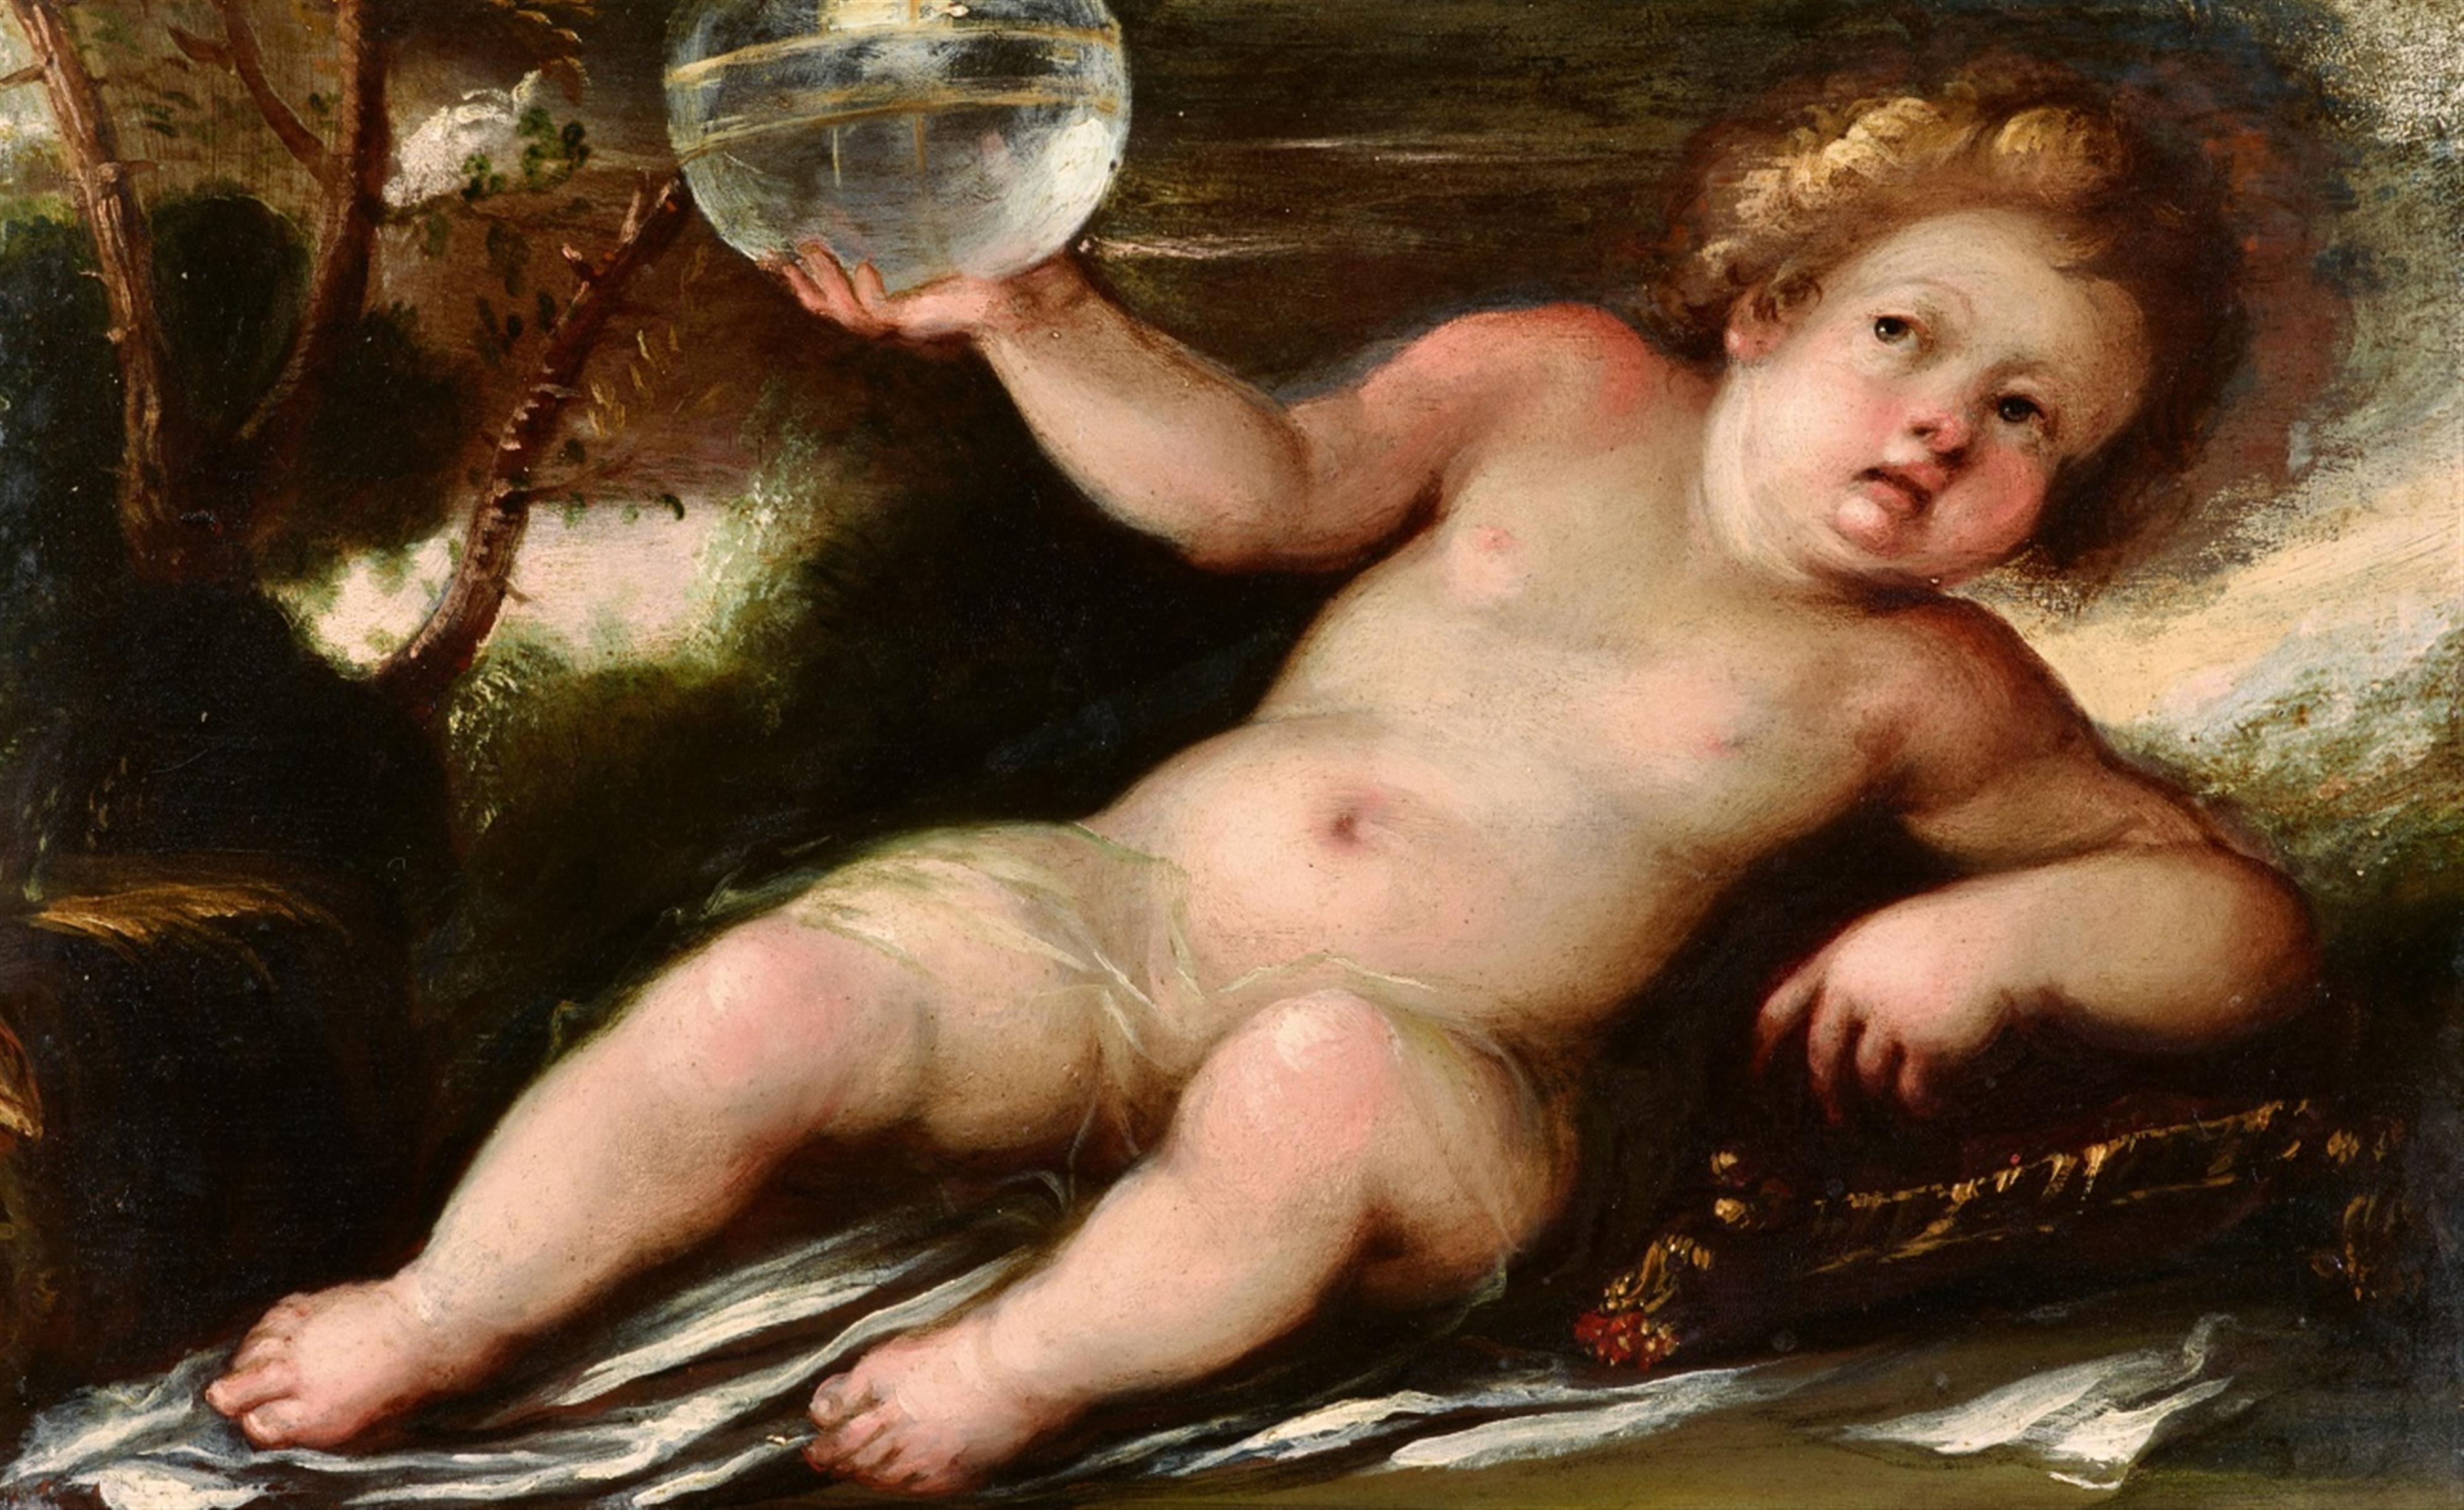 Lombardian School 17th century - The Infant John the Baptist with the Agnus Dei
The Christ Child with a Globe - image-2